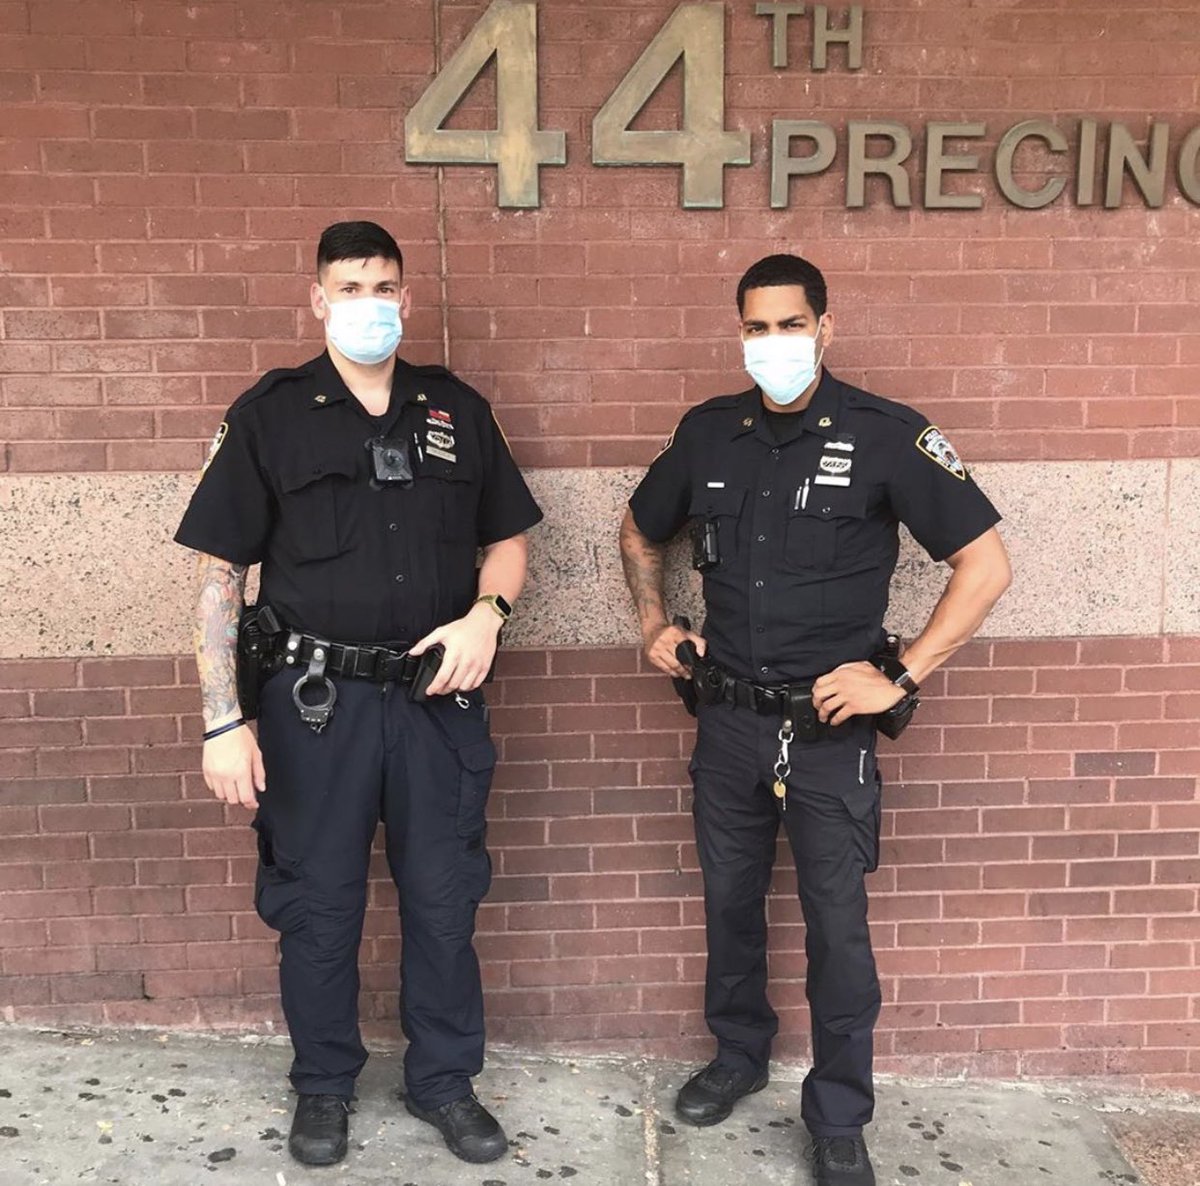 NYPD officers Modica & Salvador were stopped at a red light when they saw a mother holding her child, screaming for help. The 2 yr old had swallowed a hair clip & wasn’t breathing. The officers quickly provided assistance, dislodged the clip, & saved her life.  #BacktheBlue